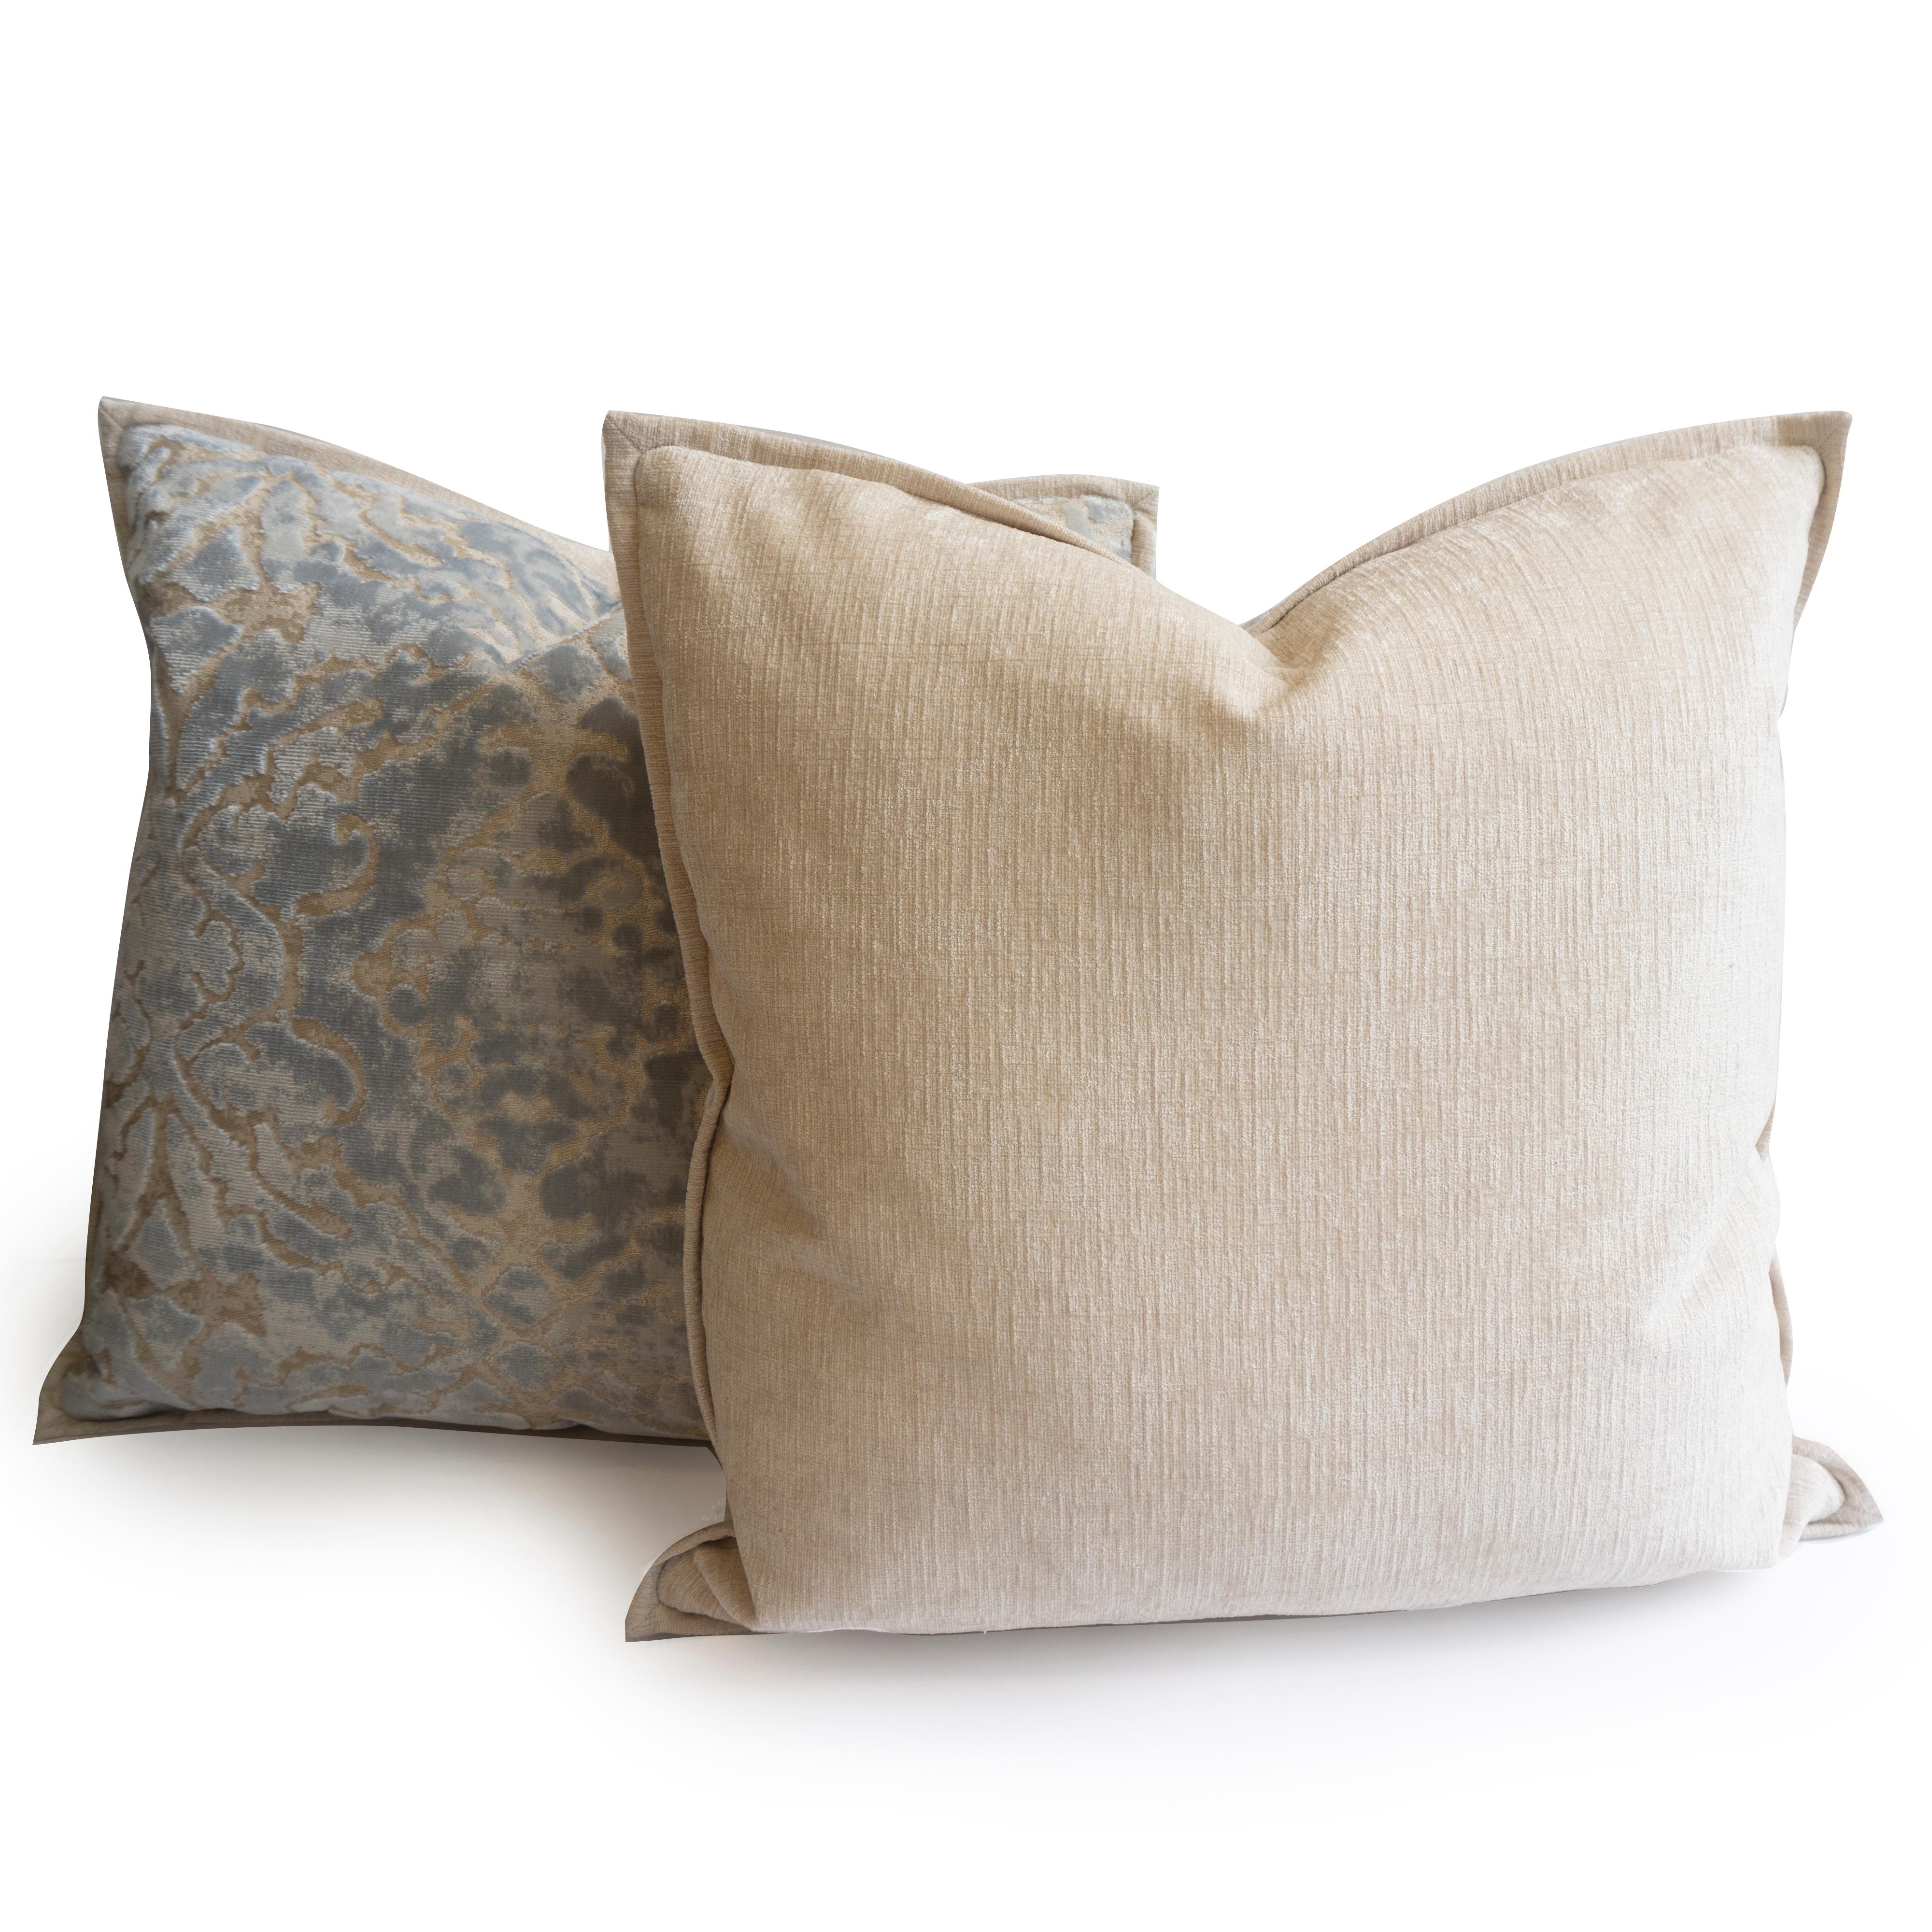 This pair of throw pillows were hand sewn at our studio in Norwalk, Connecticut. The pillows feature a light blue cut velvet damask pattern and beige back and flange. 
Made to Order.

Measurements: 20